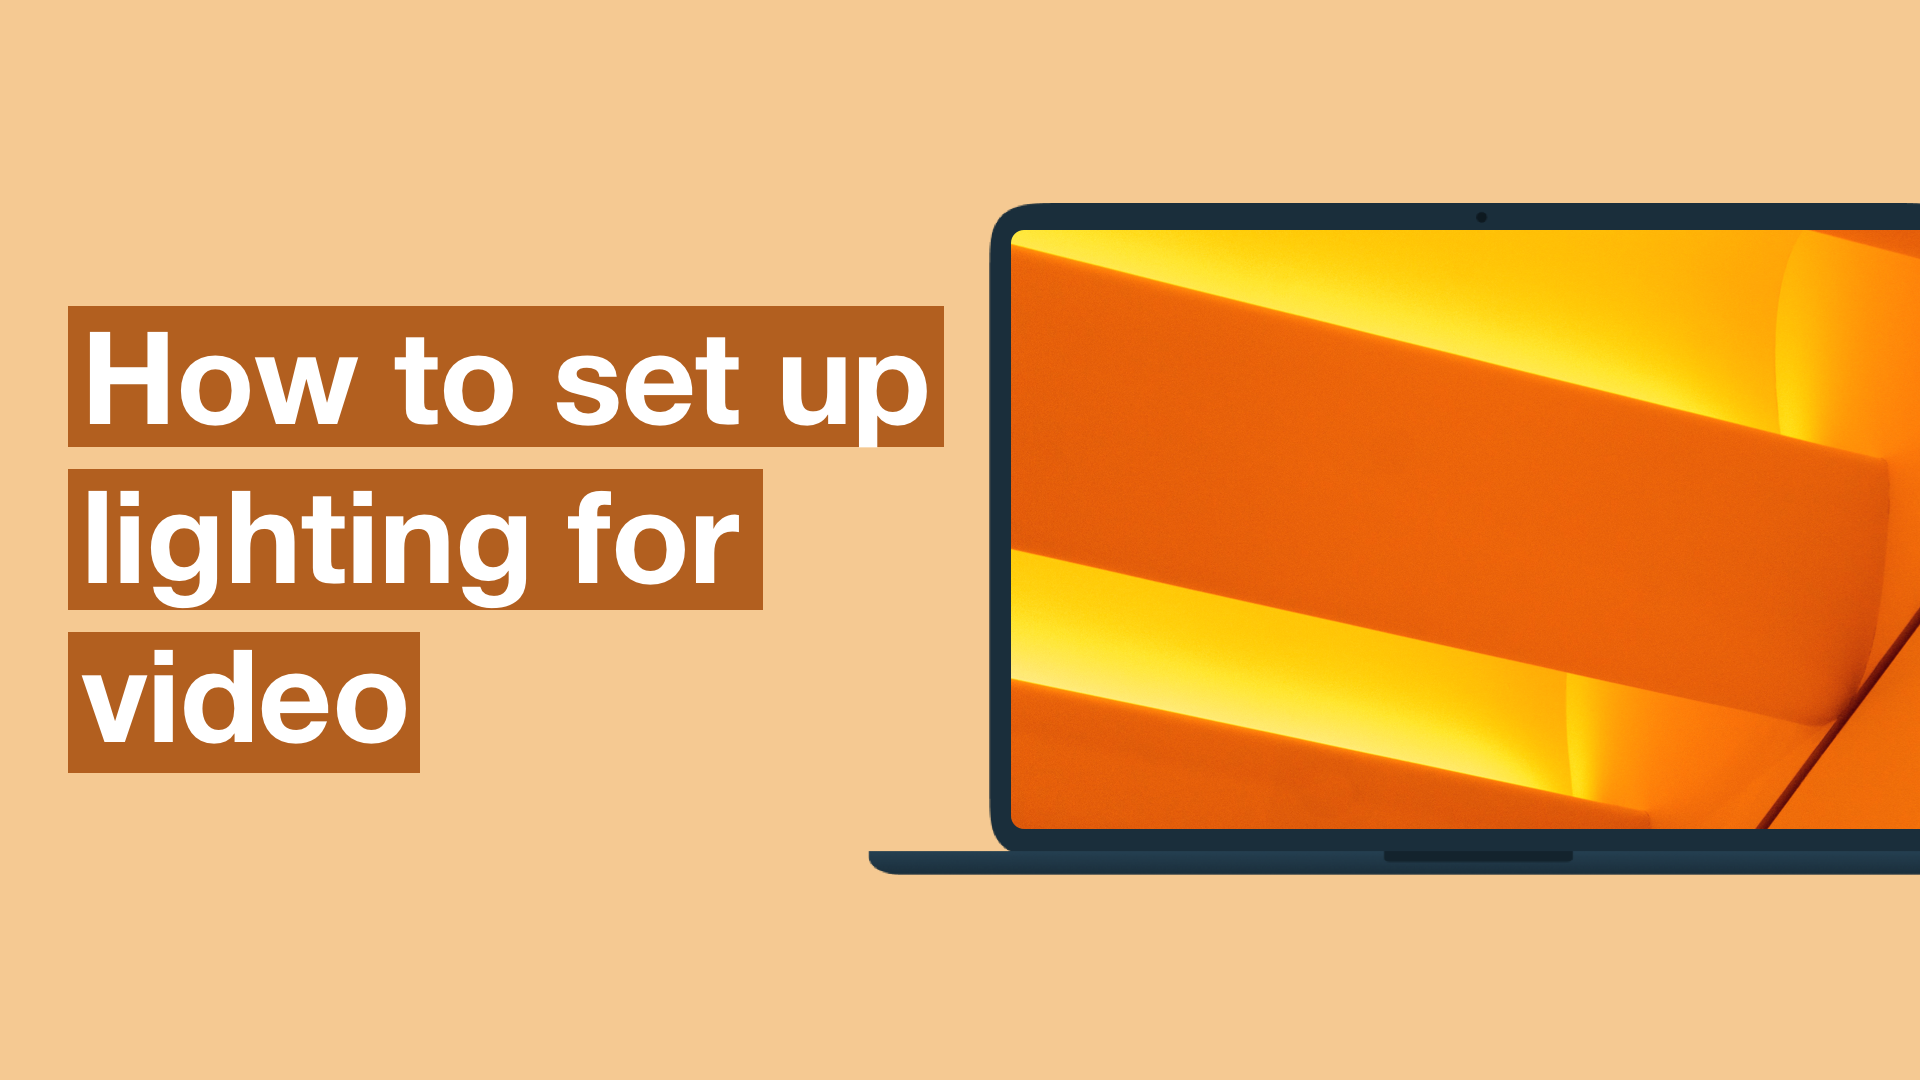 Laptop screen with lighting effects, text reads "how to set up lighting for video"